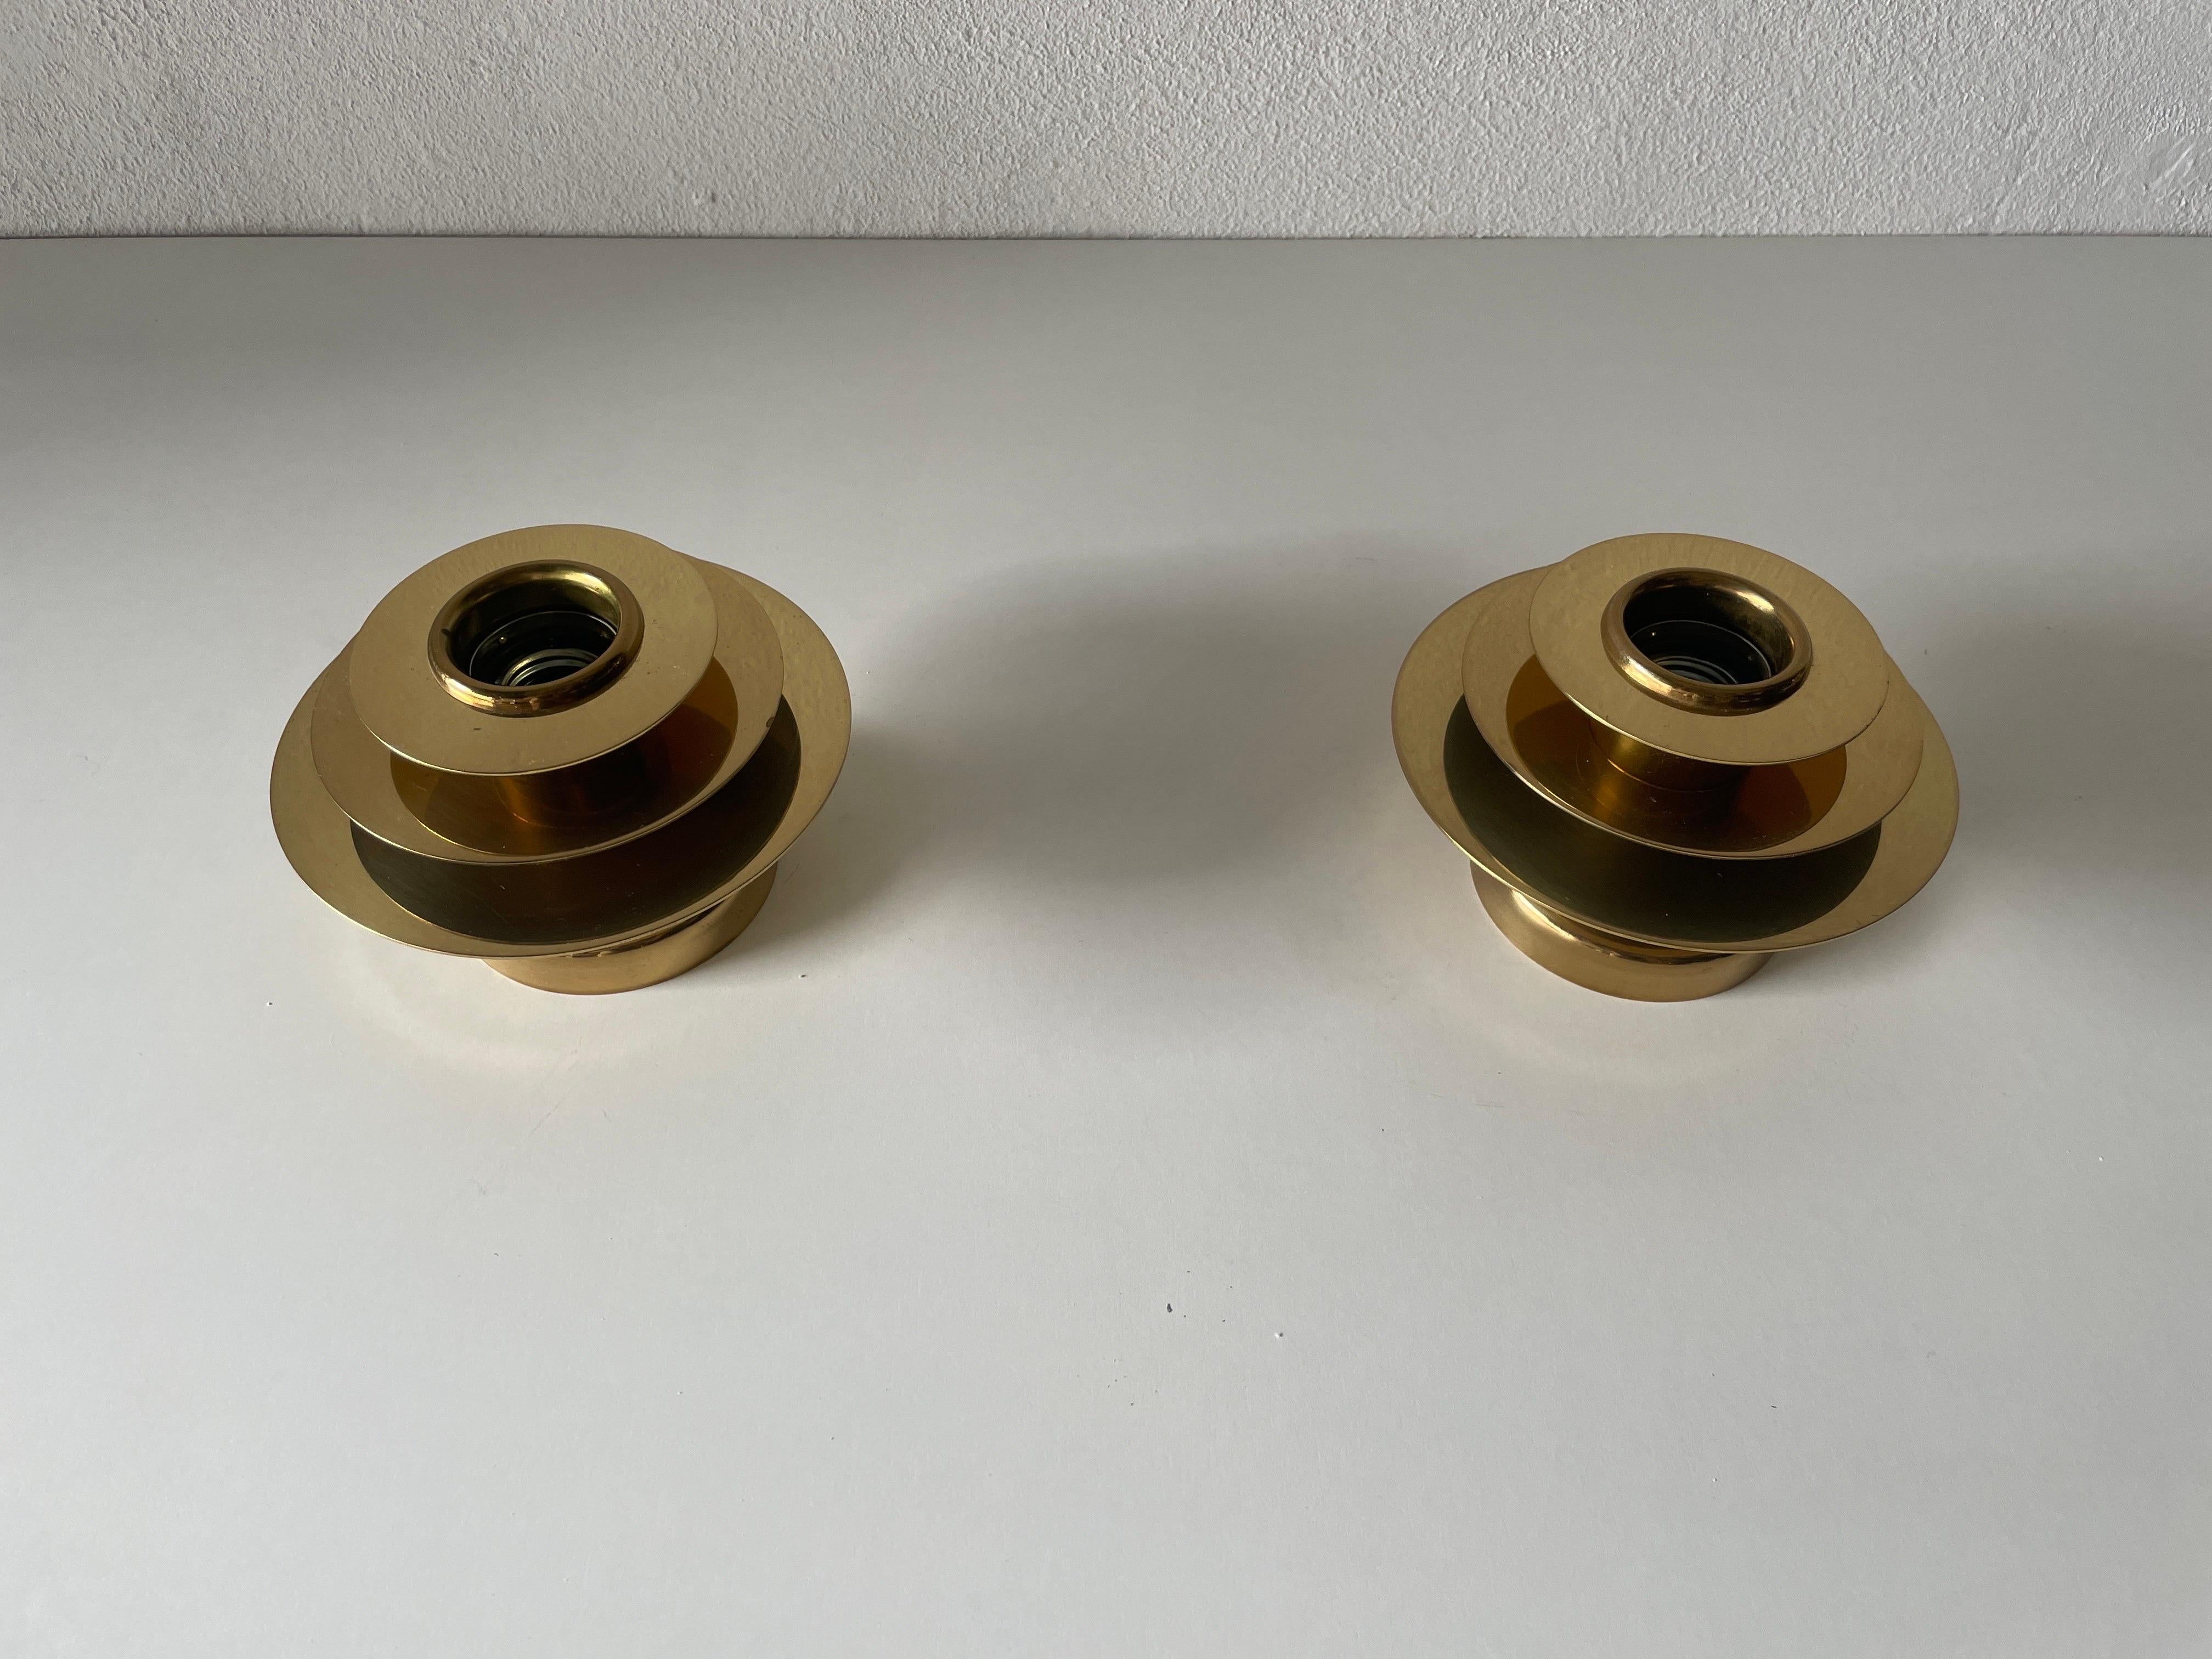 Modernist Brass Pair of Sconces or Ceiling Lamp by Schröder & Co, 1960s, Germany

Very nice high quality wall lamps

Lamps are in very good vintage condition.

These lamps works with E27 standard light bulbs. 
Wired and suitable to use in all